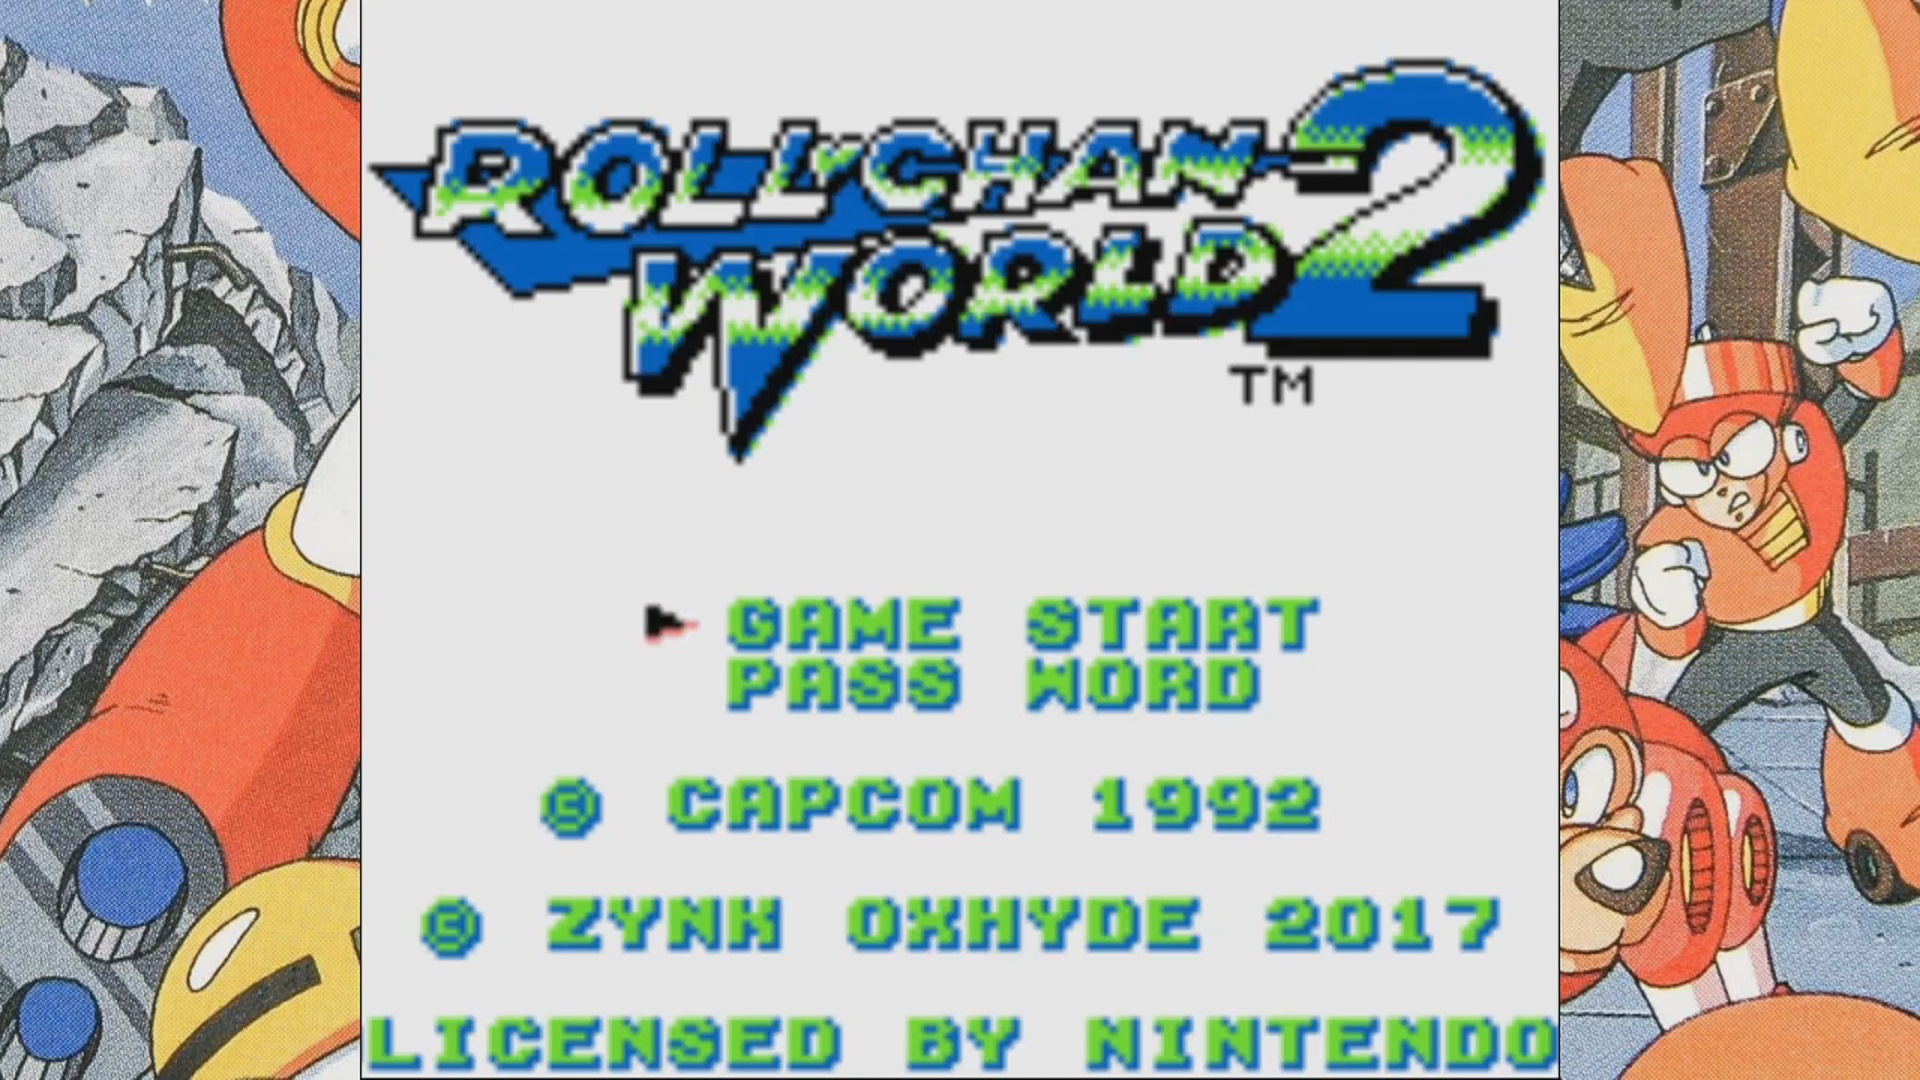 Let's Play Roll-chan World 2